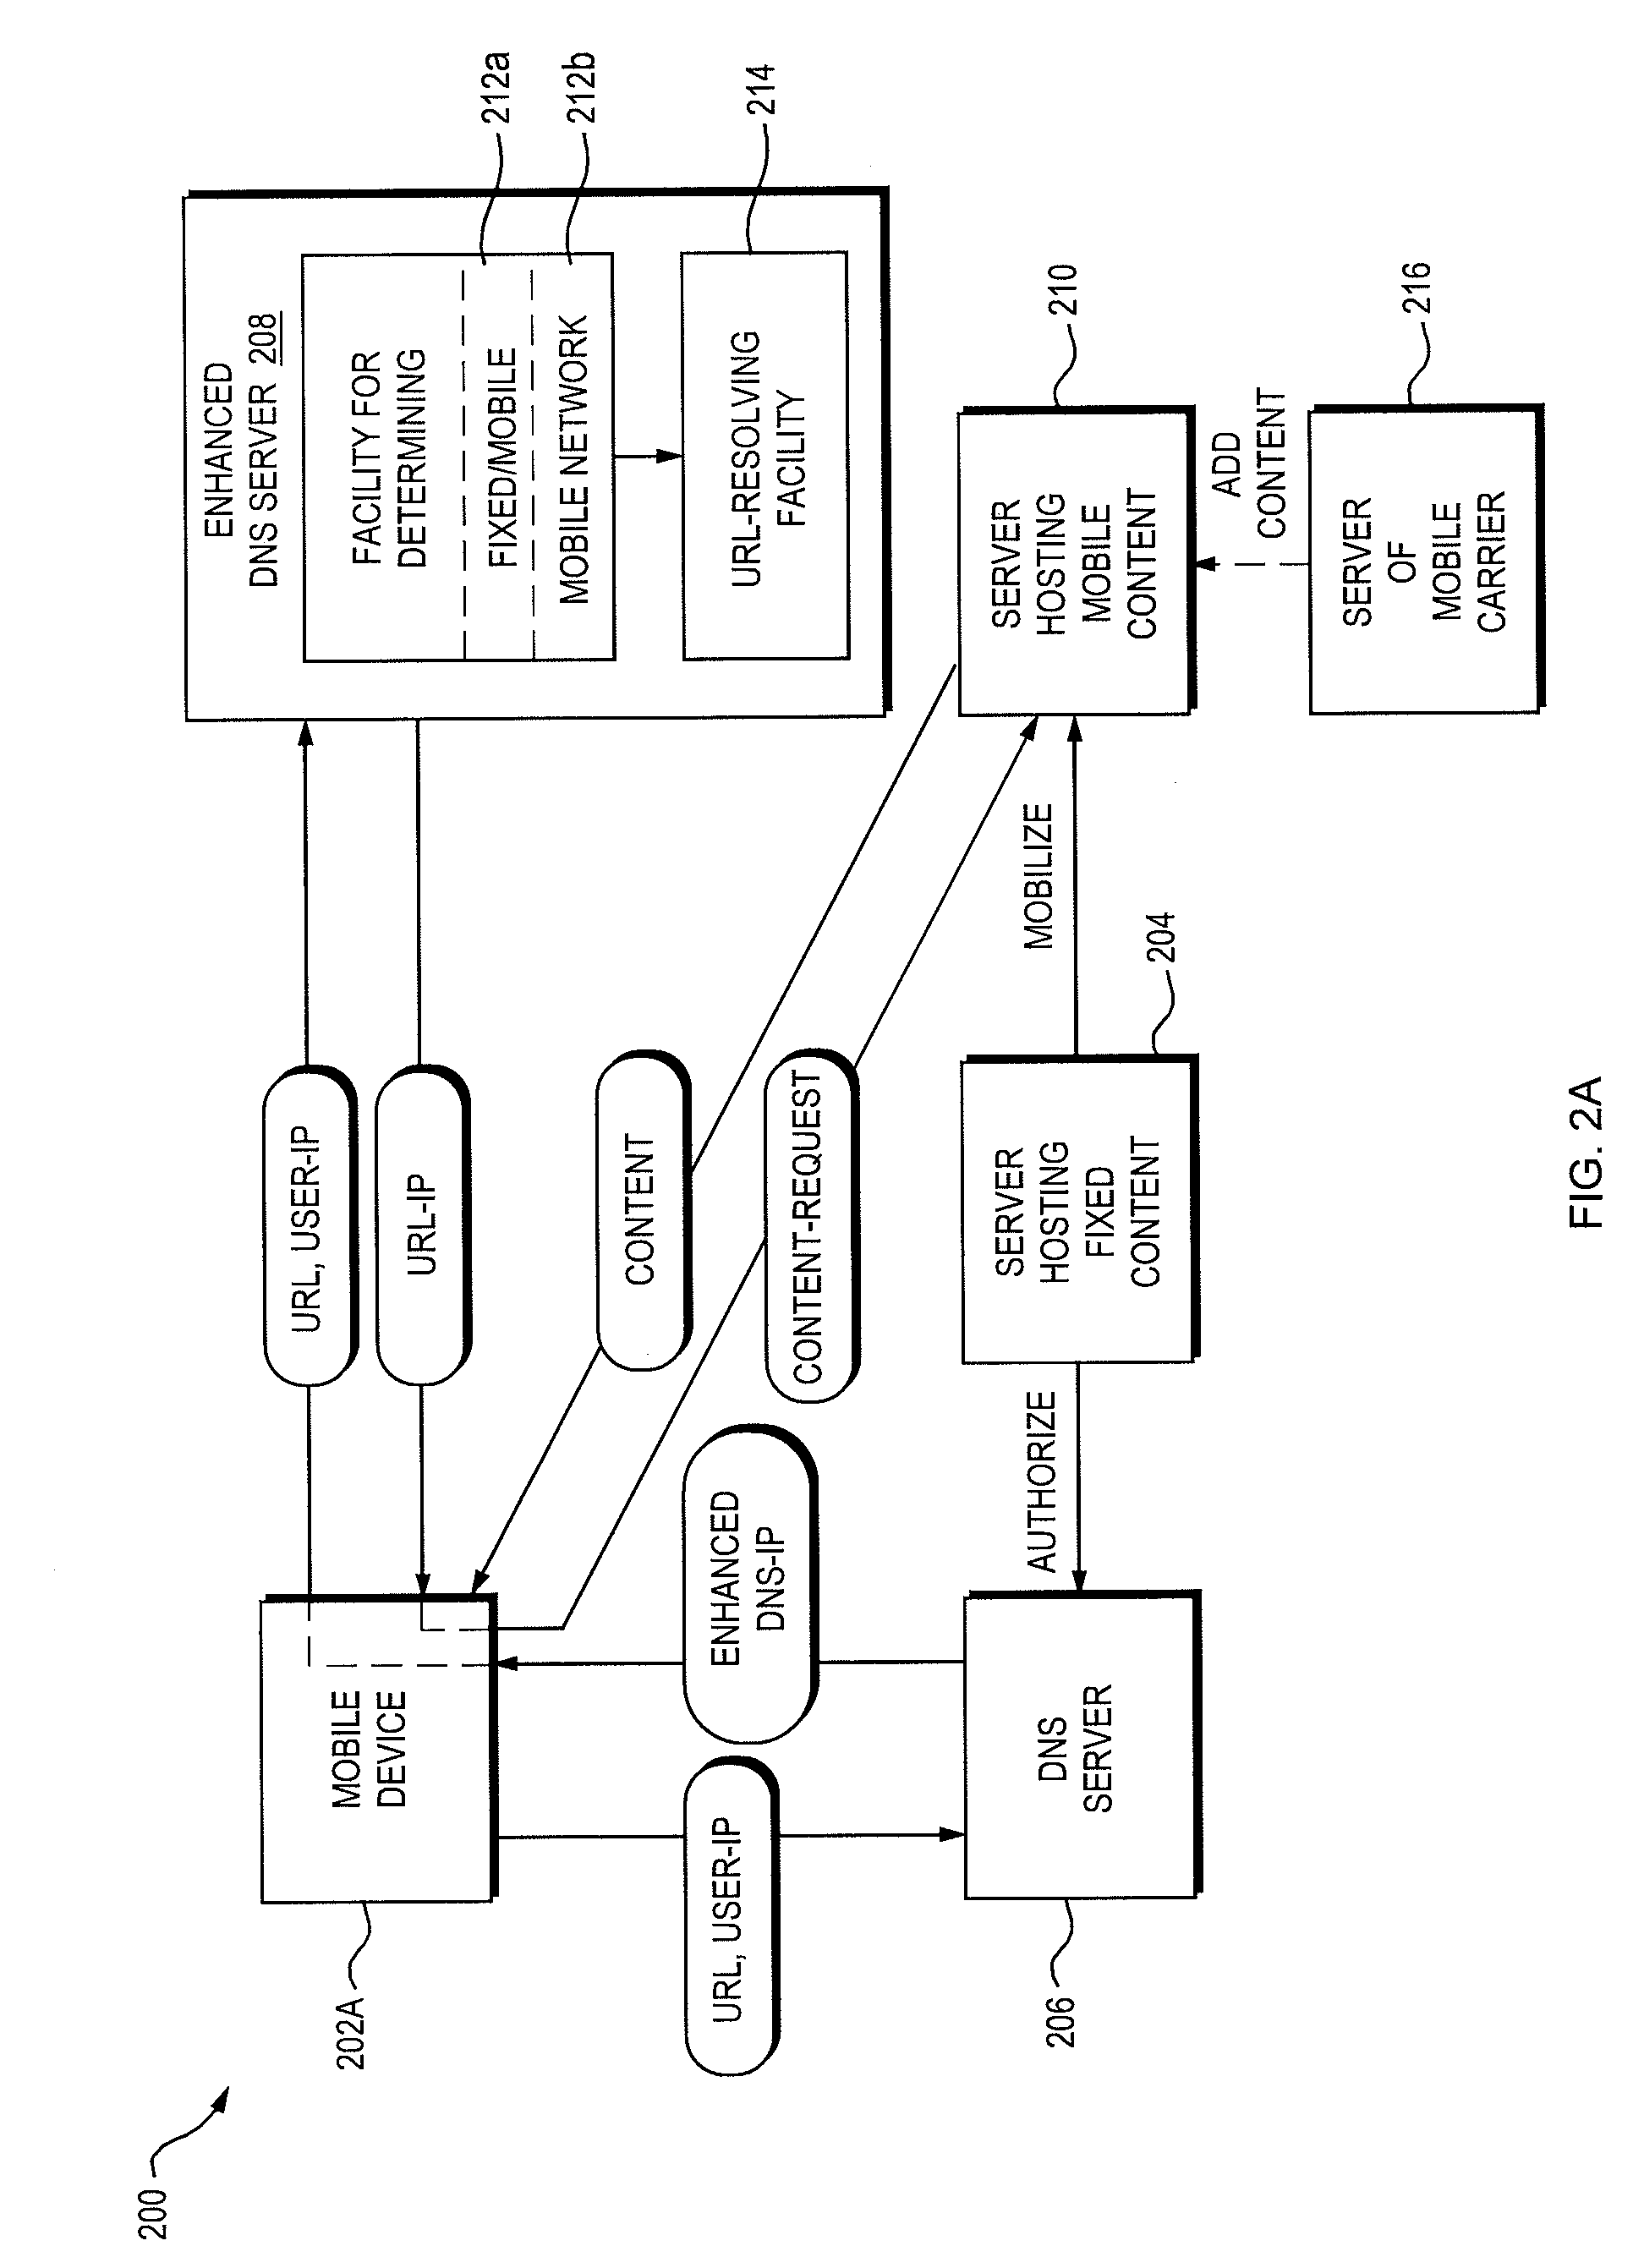 Routing Network Requests Based on a Mobile Network Signature